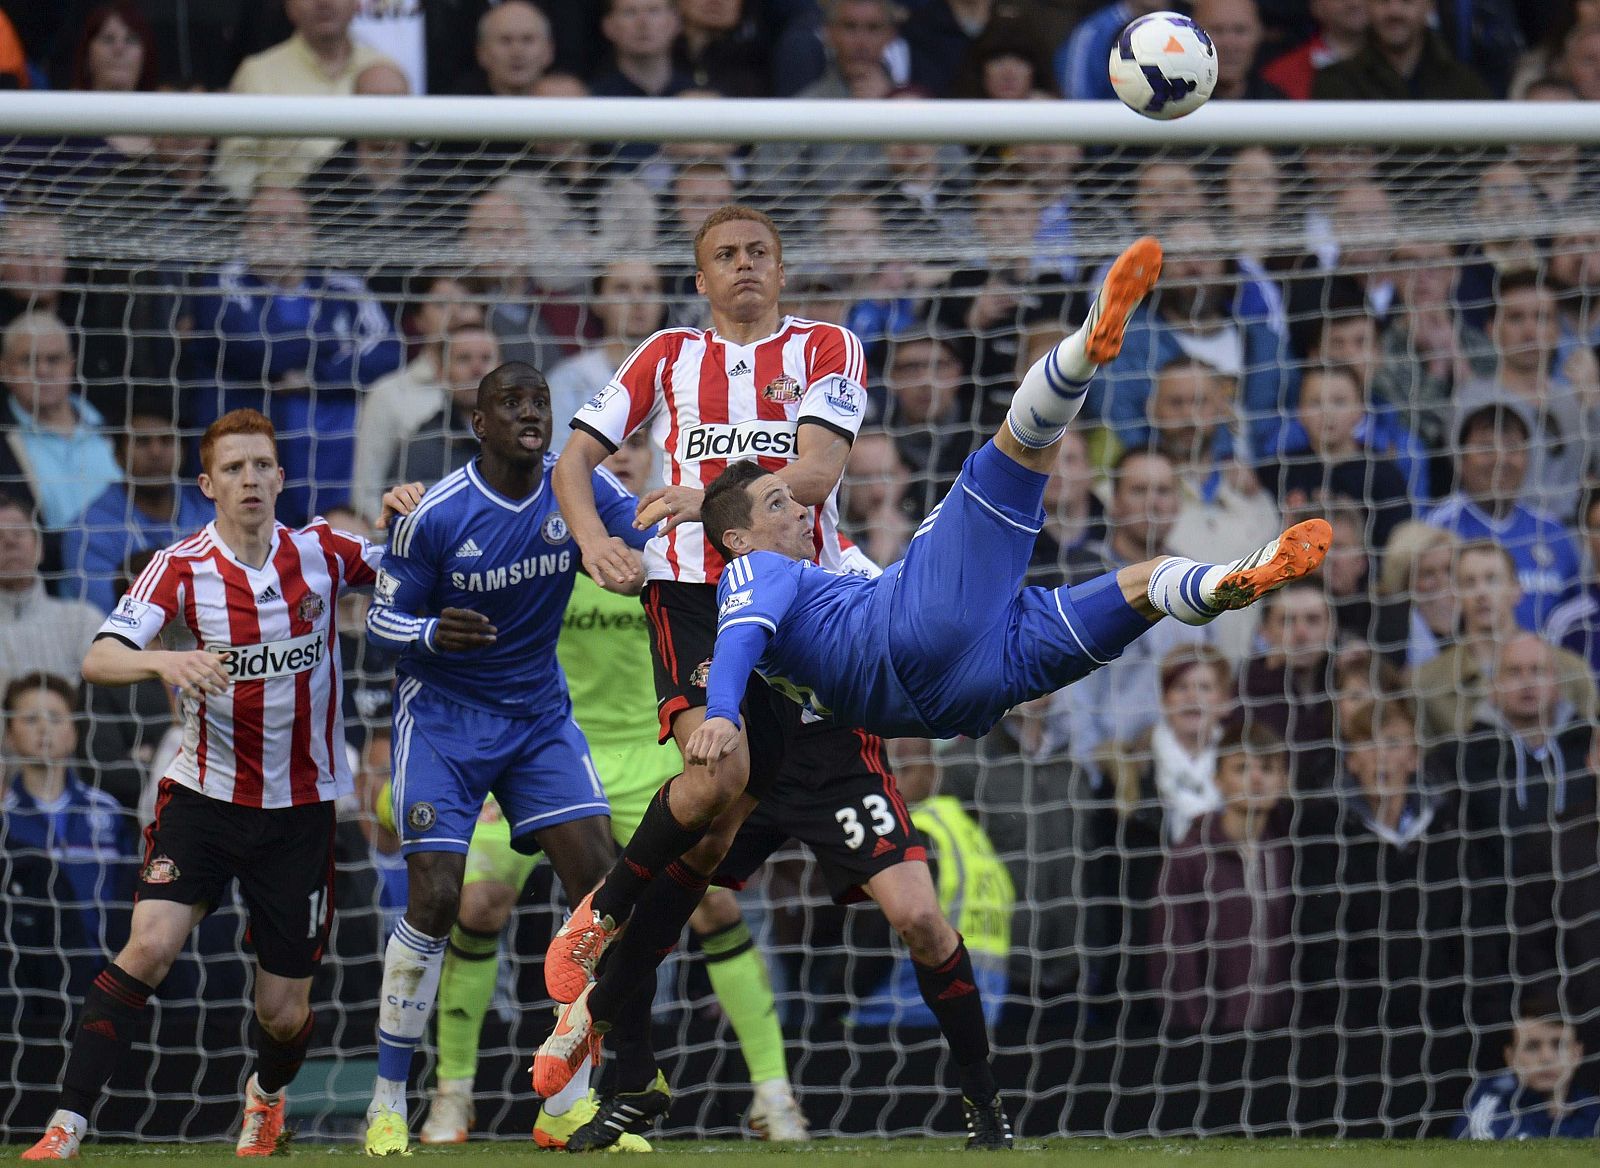 Chelsea's Torres attempts an overhead kick during their English Premier League soccer match against Sunderland in London